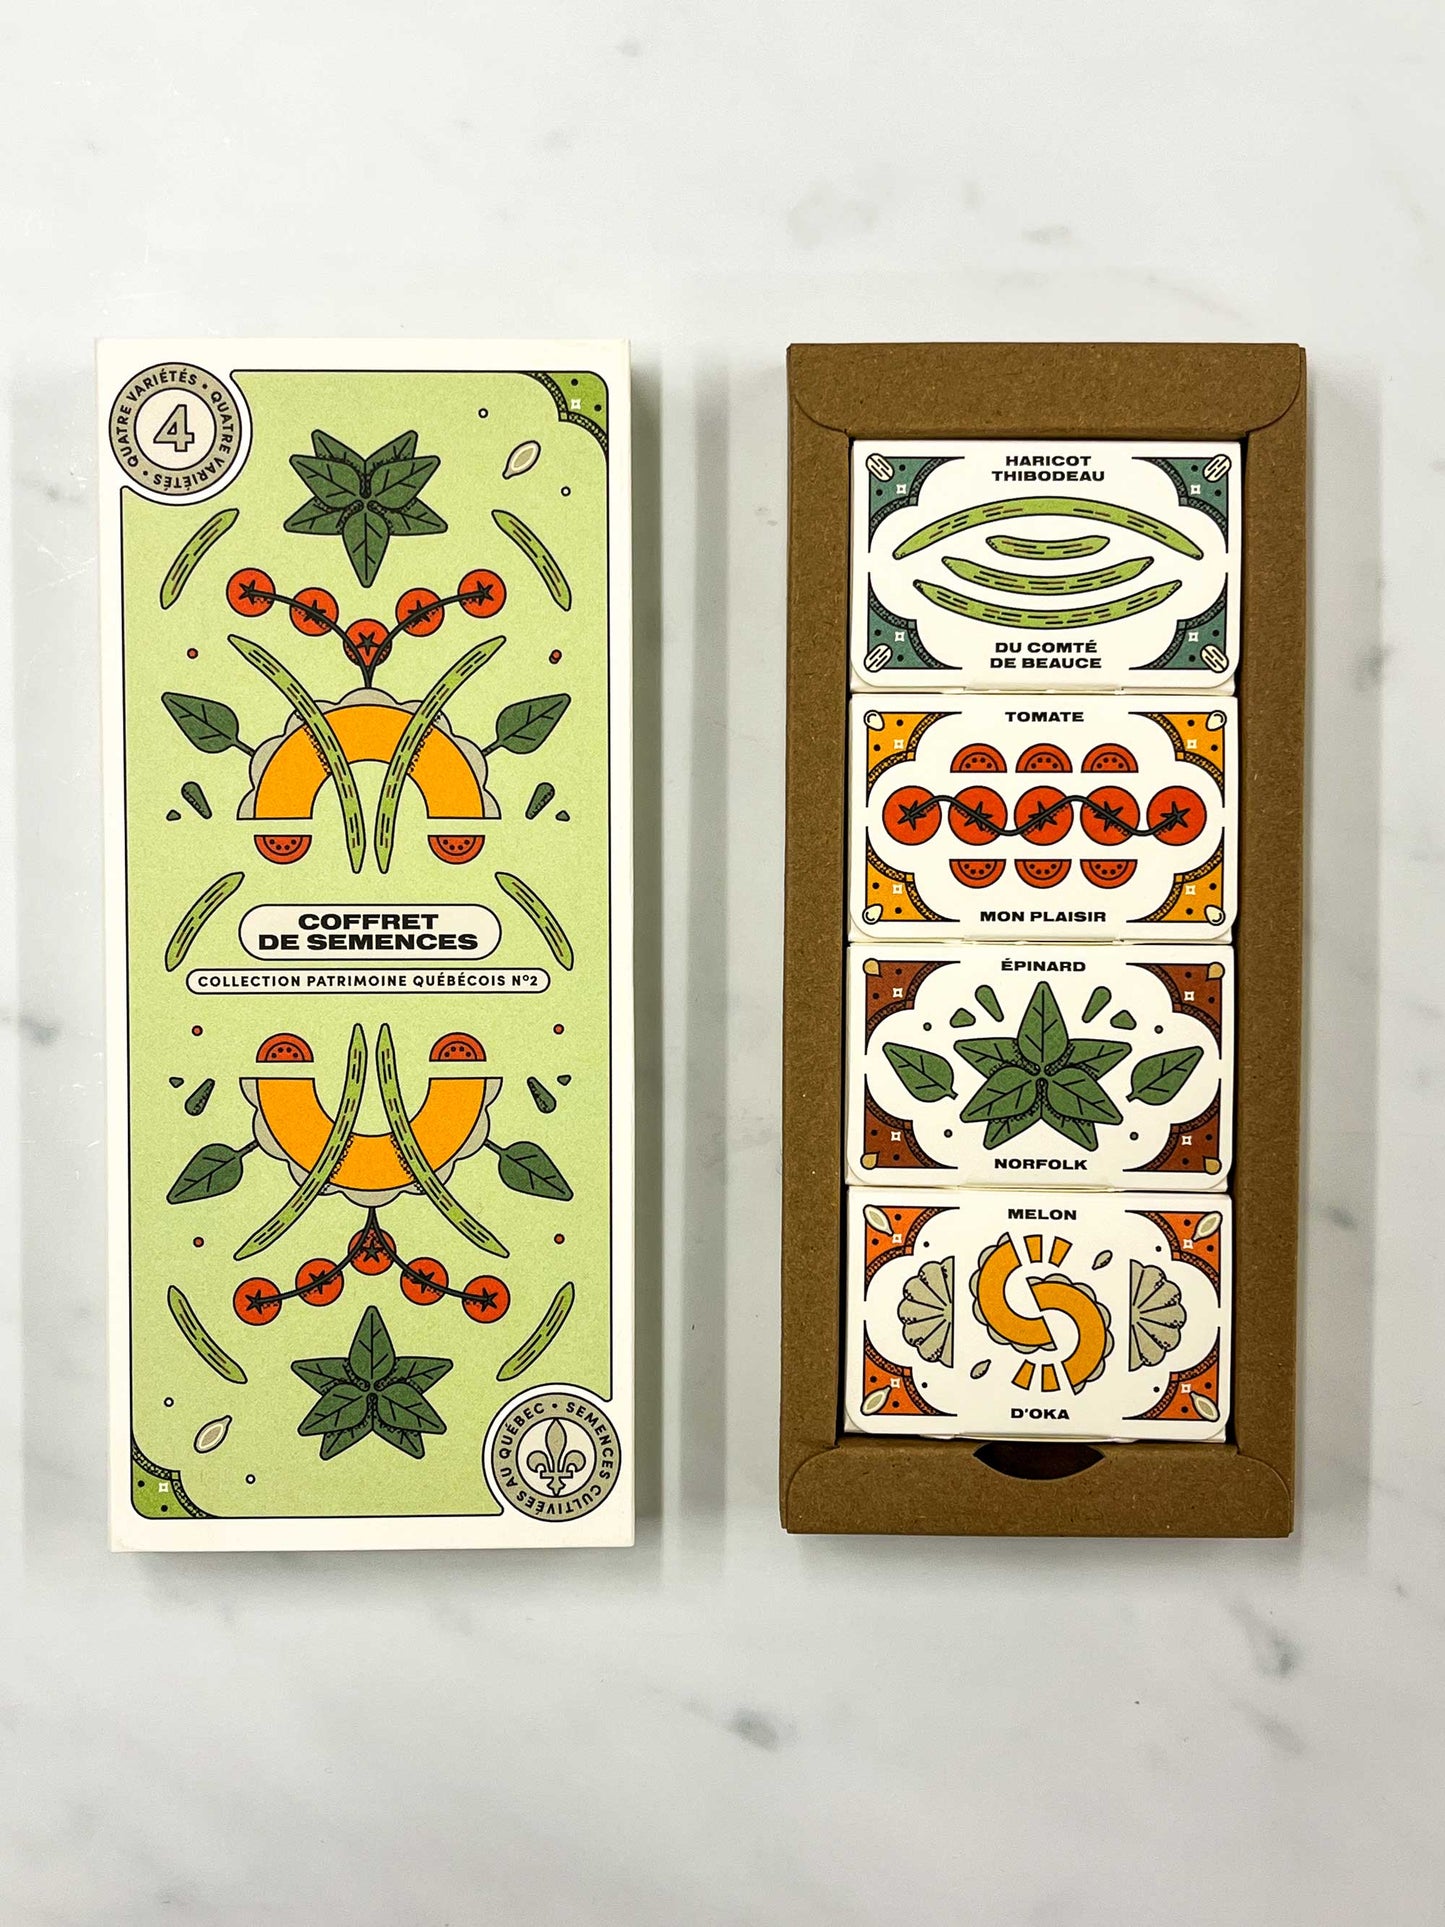 Open Quebec Heritage seed collection box set with Thibodeau de Beauce green bean, , my pleasure tomato, , Norfolk spinach, Oka melon